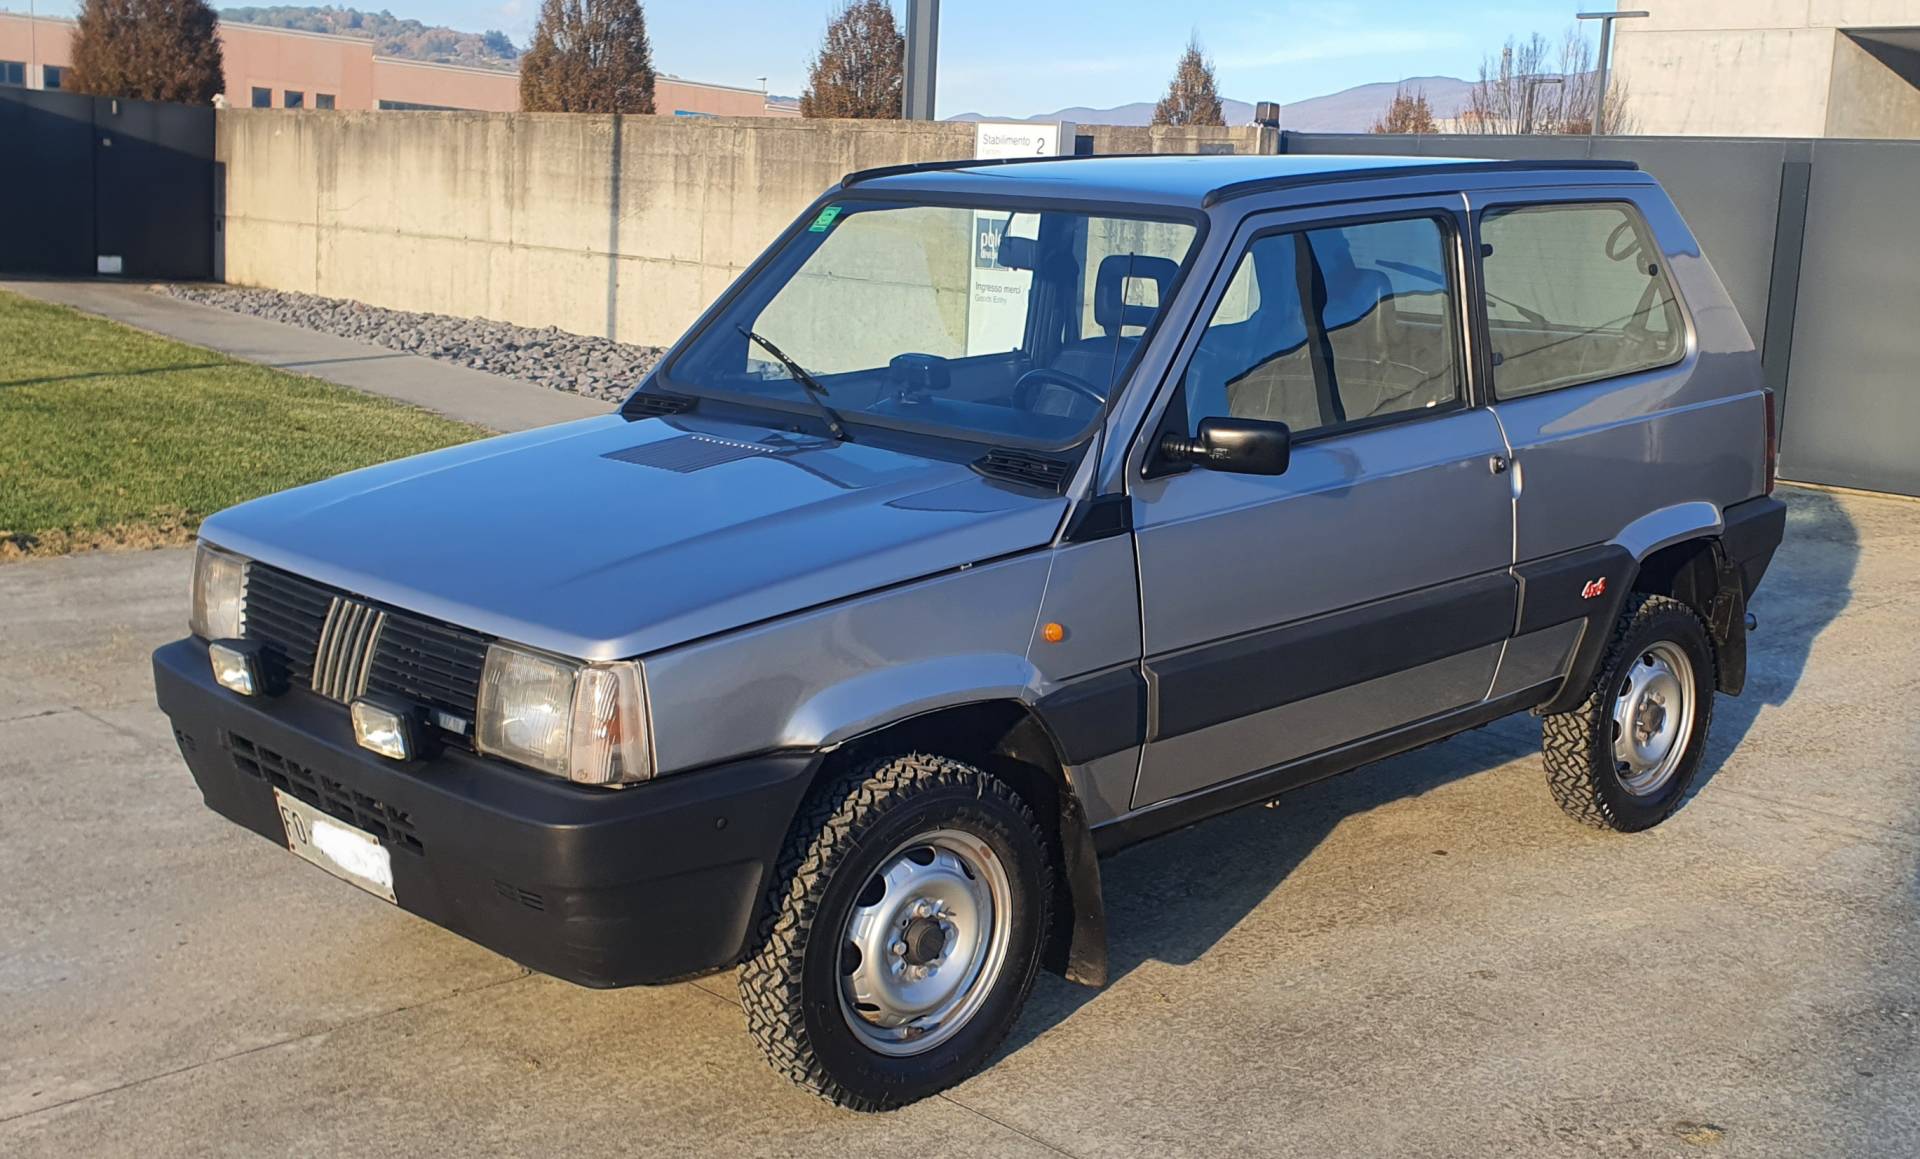 Used Fiat Panda 4x4 Cars For Sale